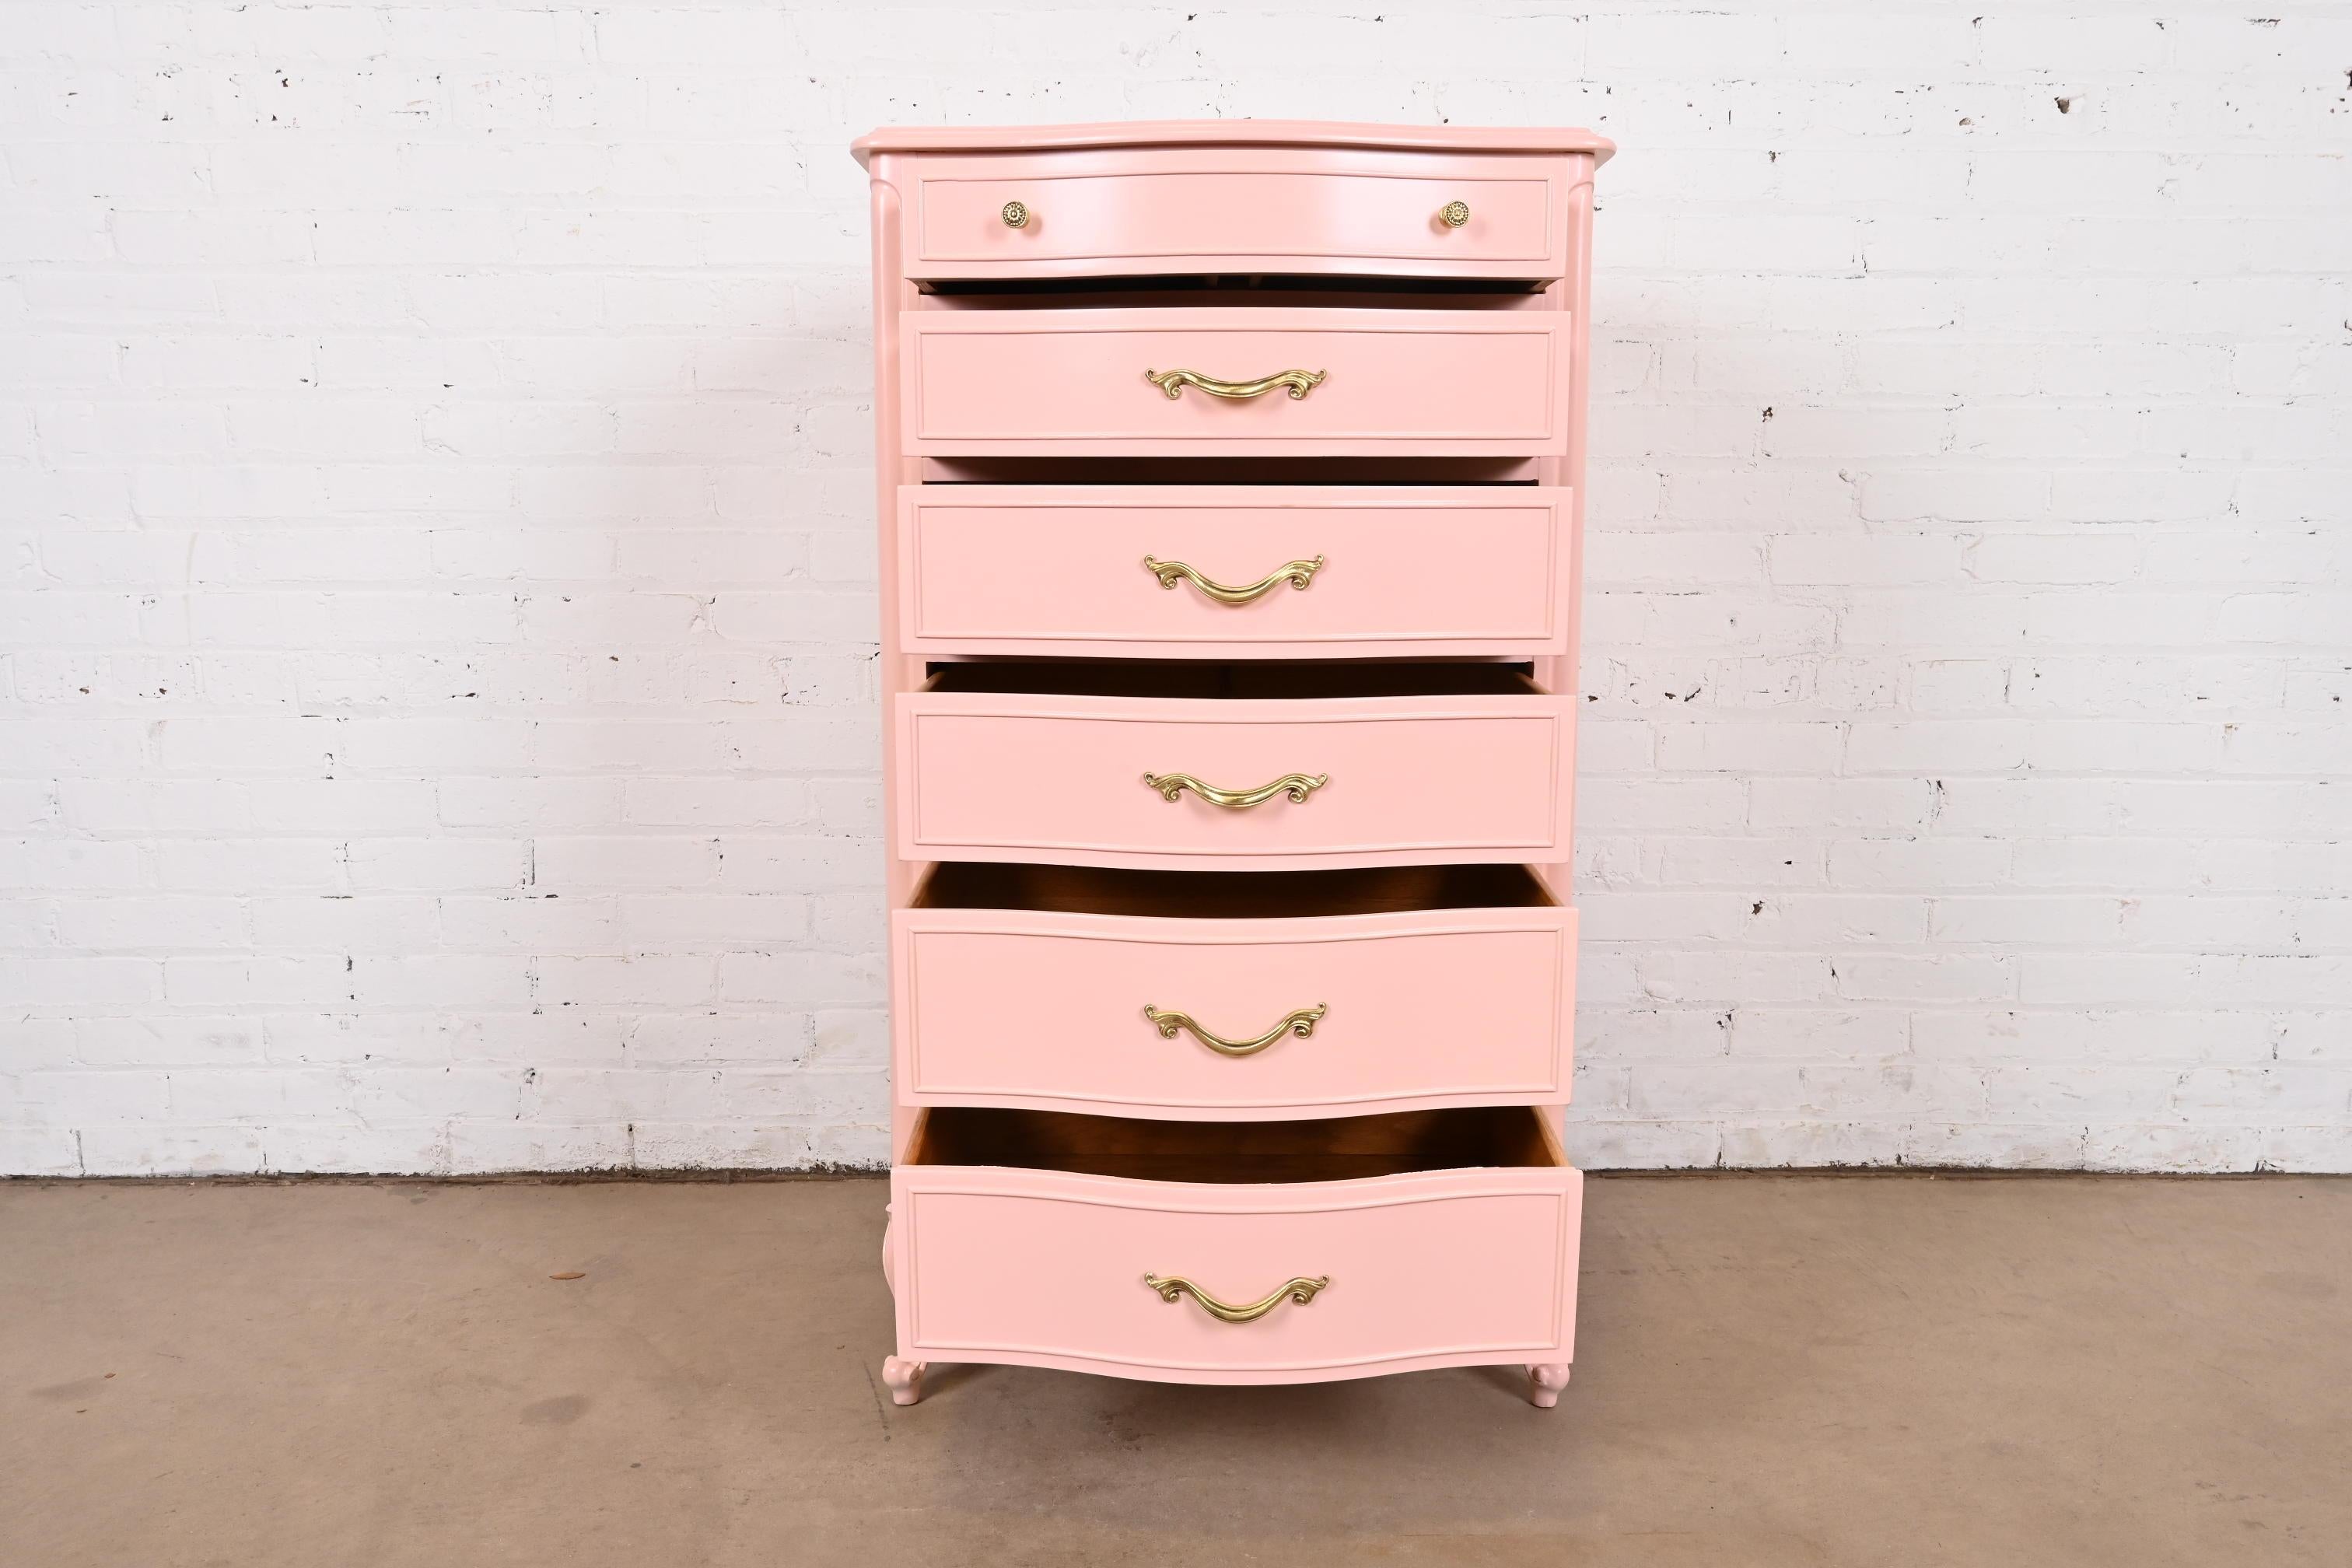 Drexel French Provincial Louis XV Pink Lacquered Lingerie Chest or Semainier For Sale 2